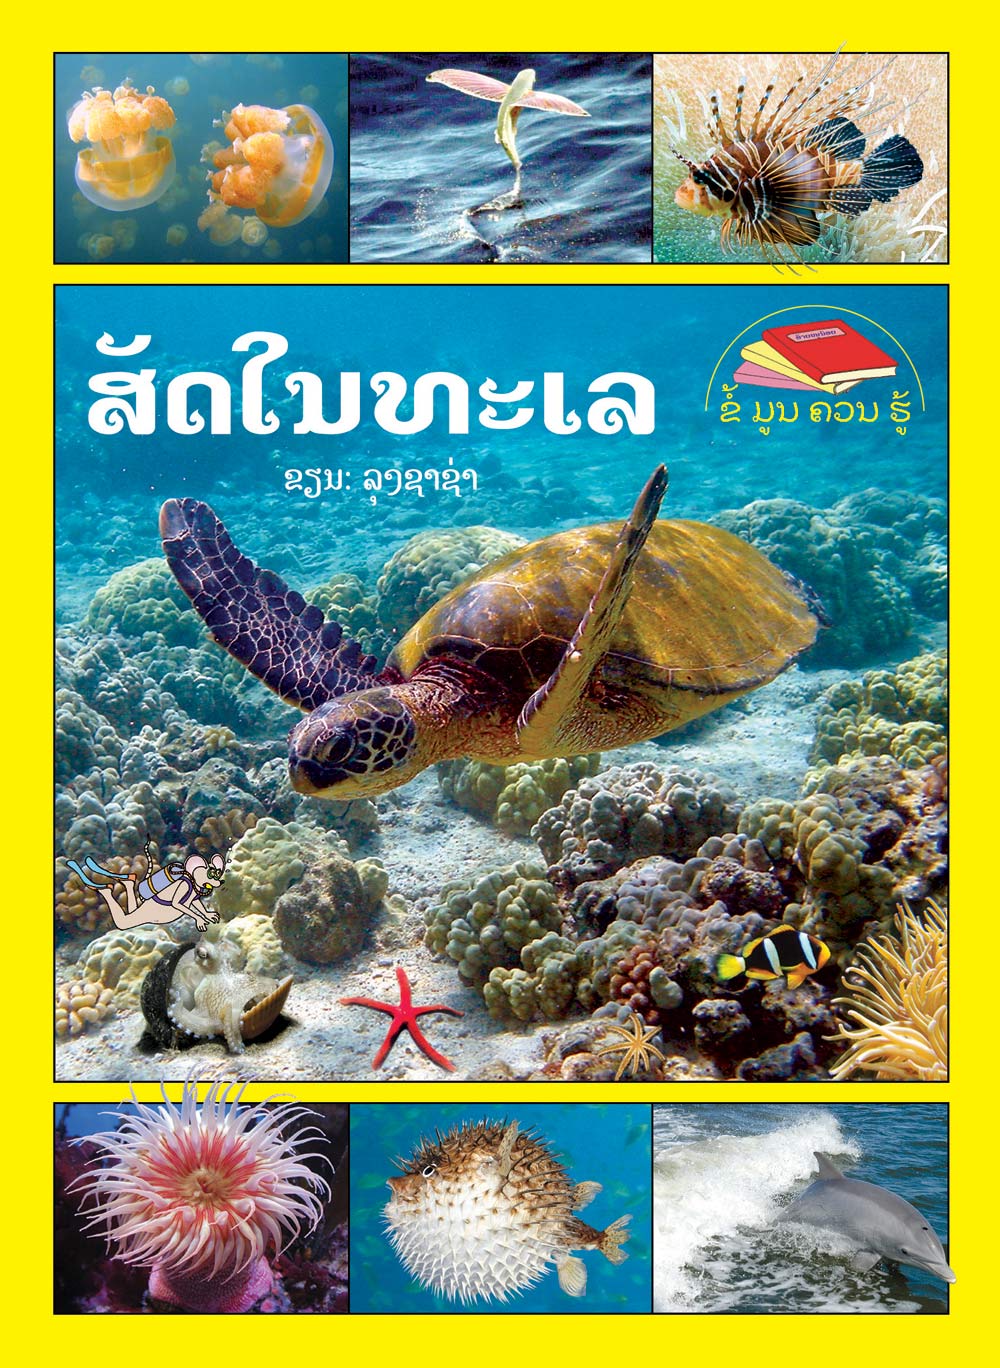 Life in the Sea large book cover, published in Lao and English